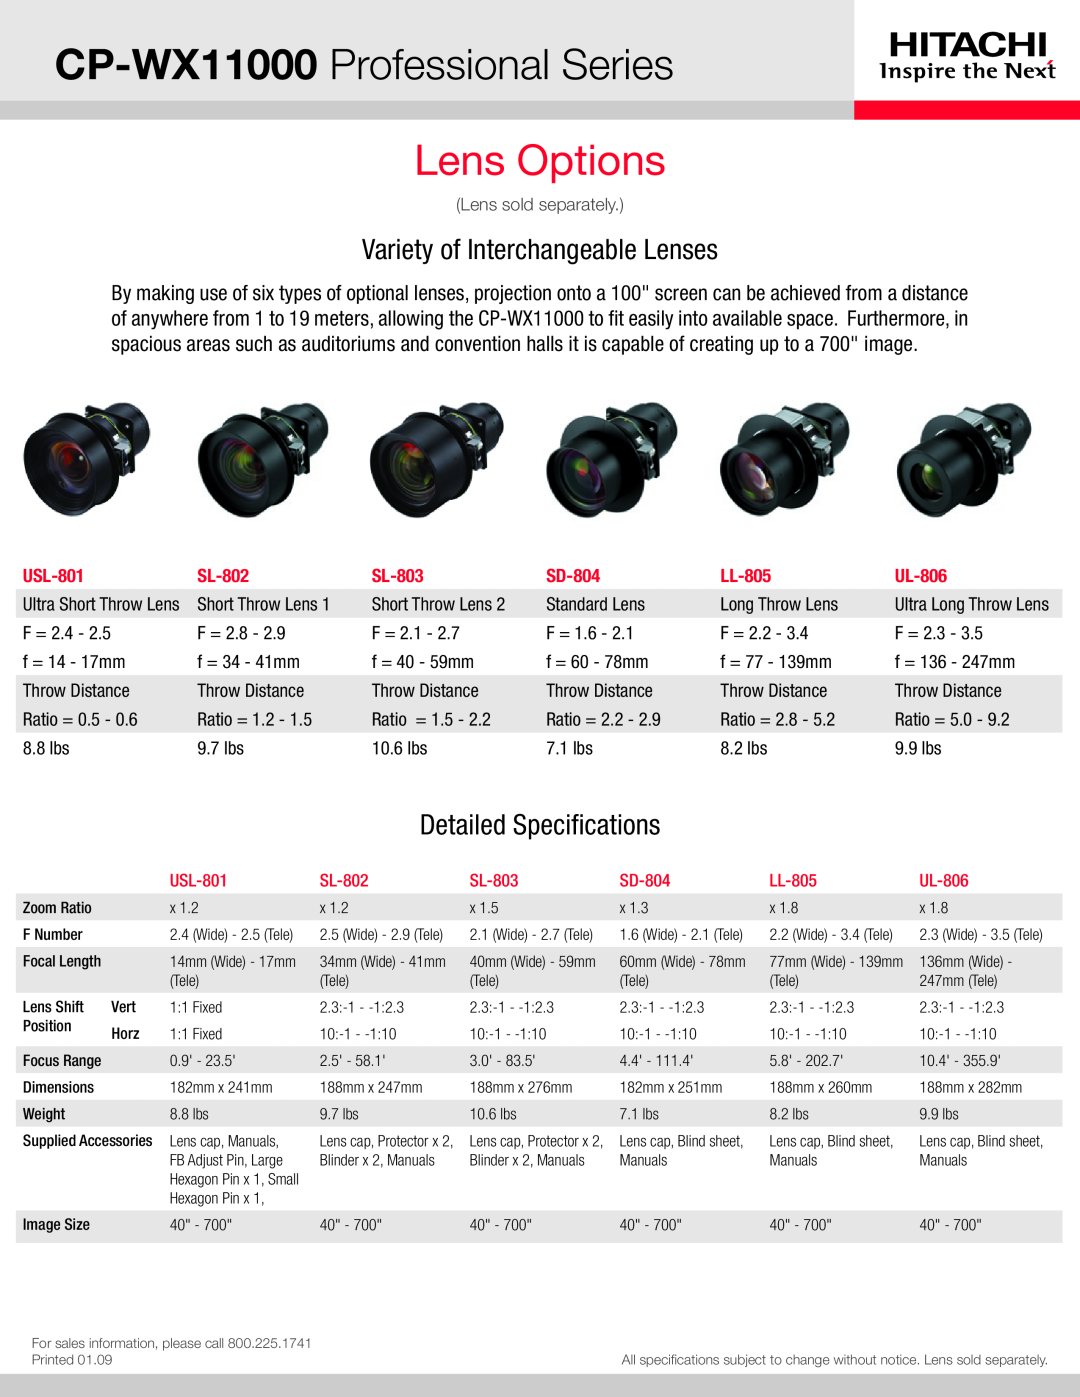 Hitachi manual CP-WX11000 Professional Series, Lens Options, Variety of Interchangeable Lenses, Detailed Specifications 